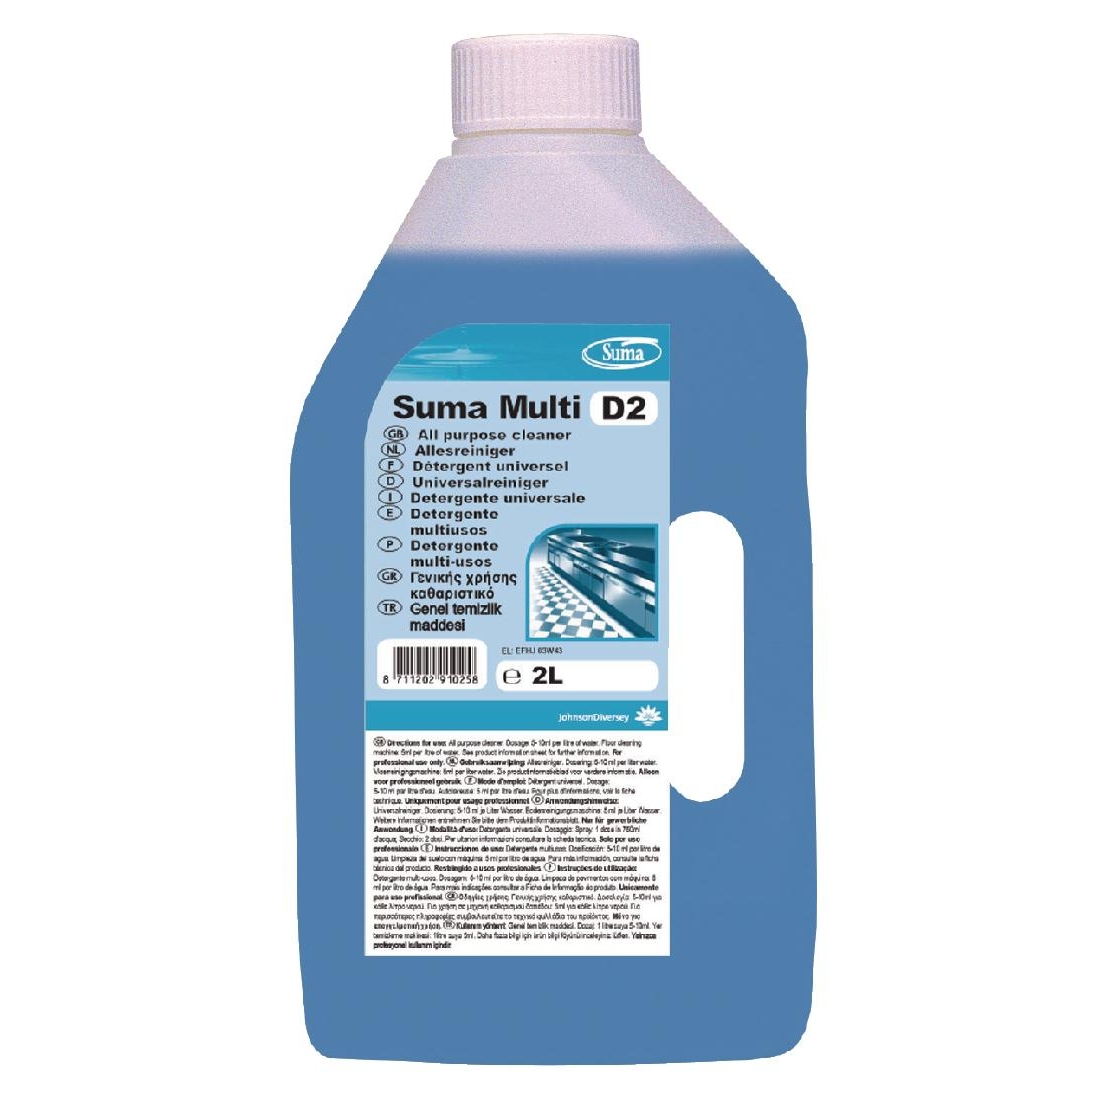 Suma Multi D2 All Purpose Cleaner 2 Litre (Pack of 6)